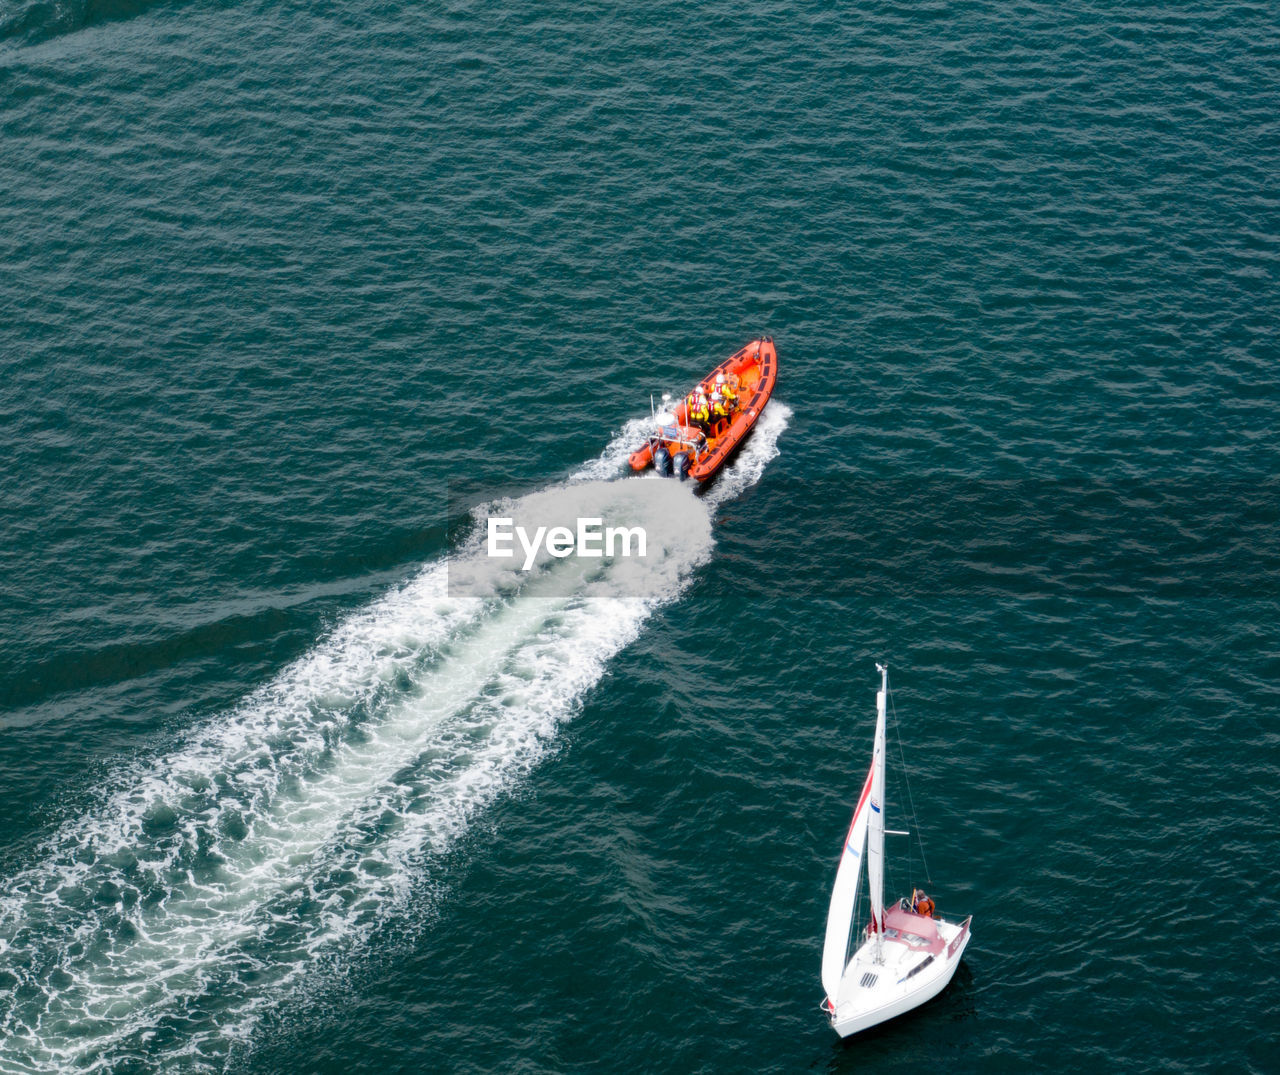 water, nautical vessel, transportation, mode of transportation, high angle view, sea, sailing, motion, wake, wave pattern, nature, sports, boat, vehicle, day, boating, on the move, speed, water sports, outdoors, men, ship, travel, watercraft, beauty in nature, wind, waterfront, adventure, aerial view, leisure activity, lifestyles, wind wave, wave, powerboating, extreme sports